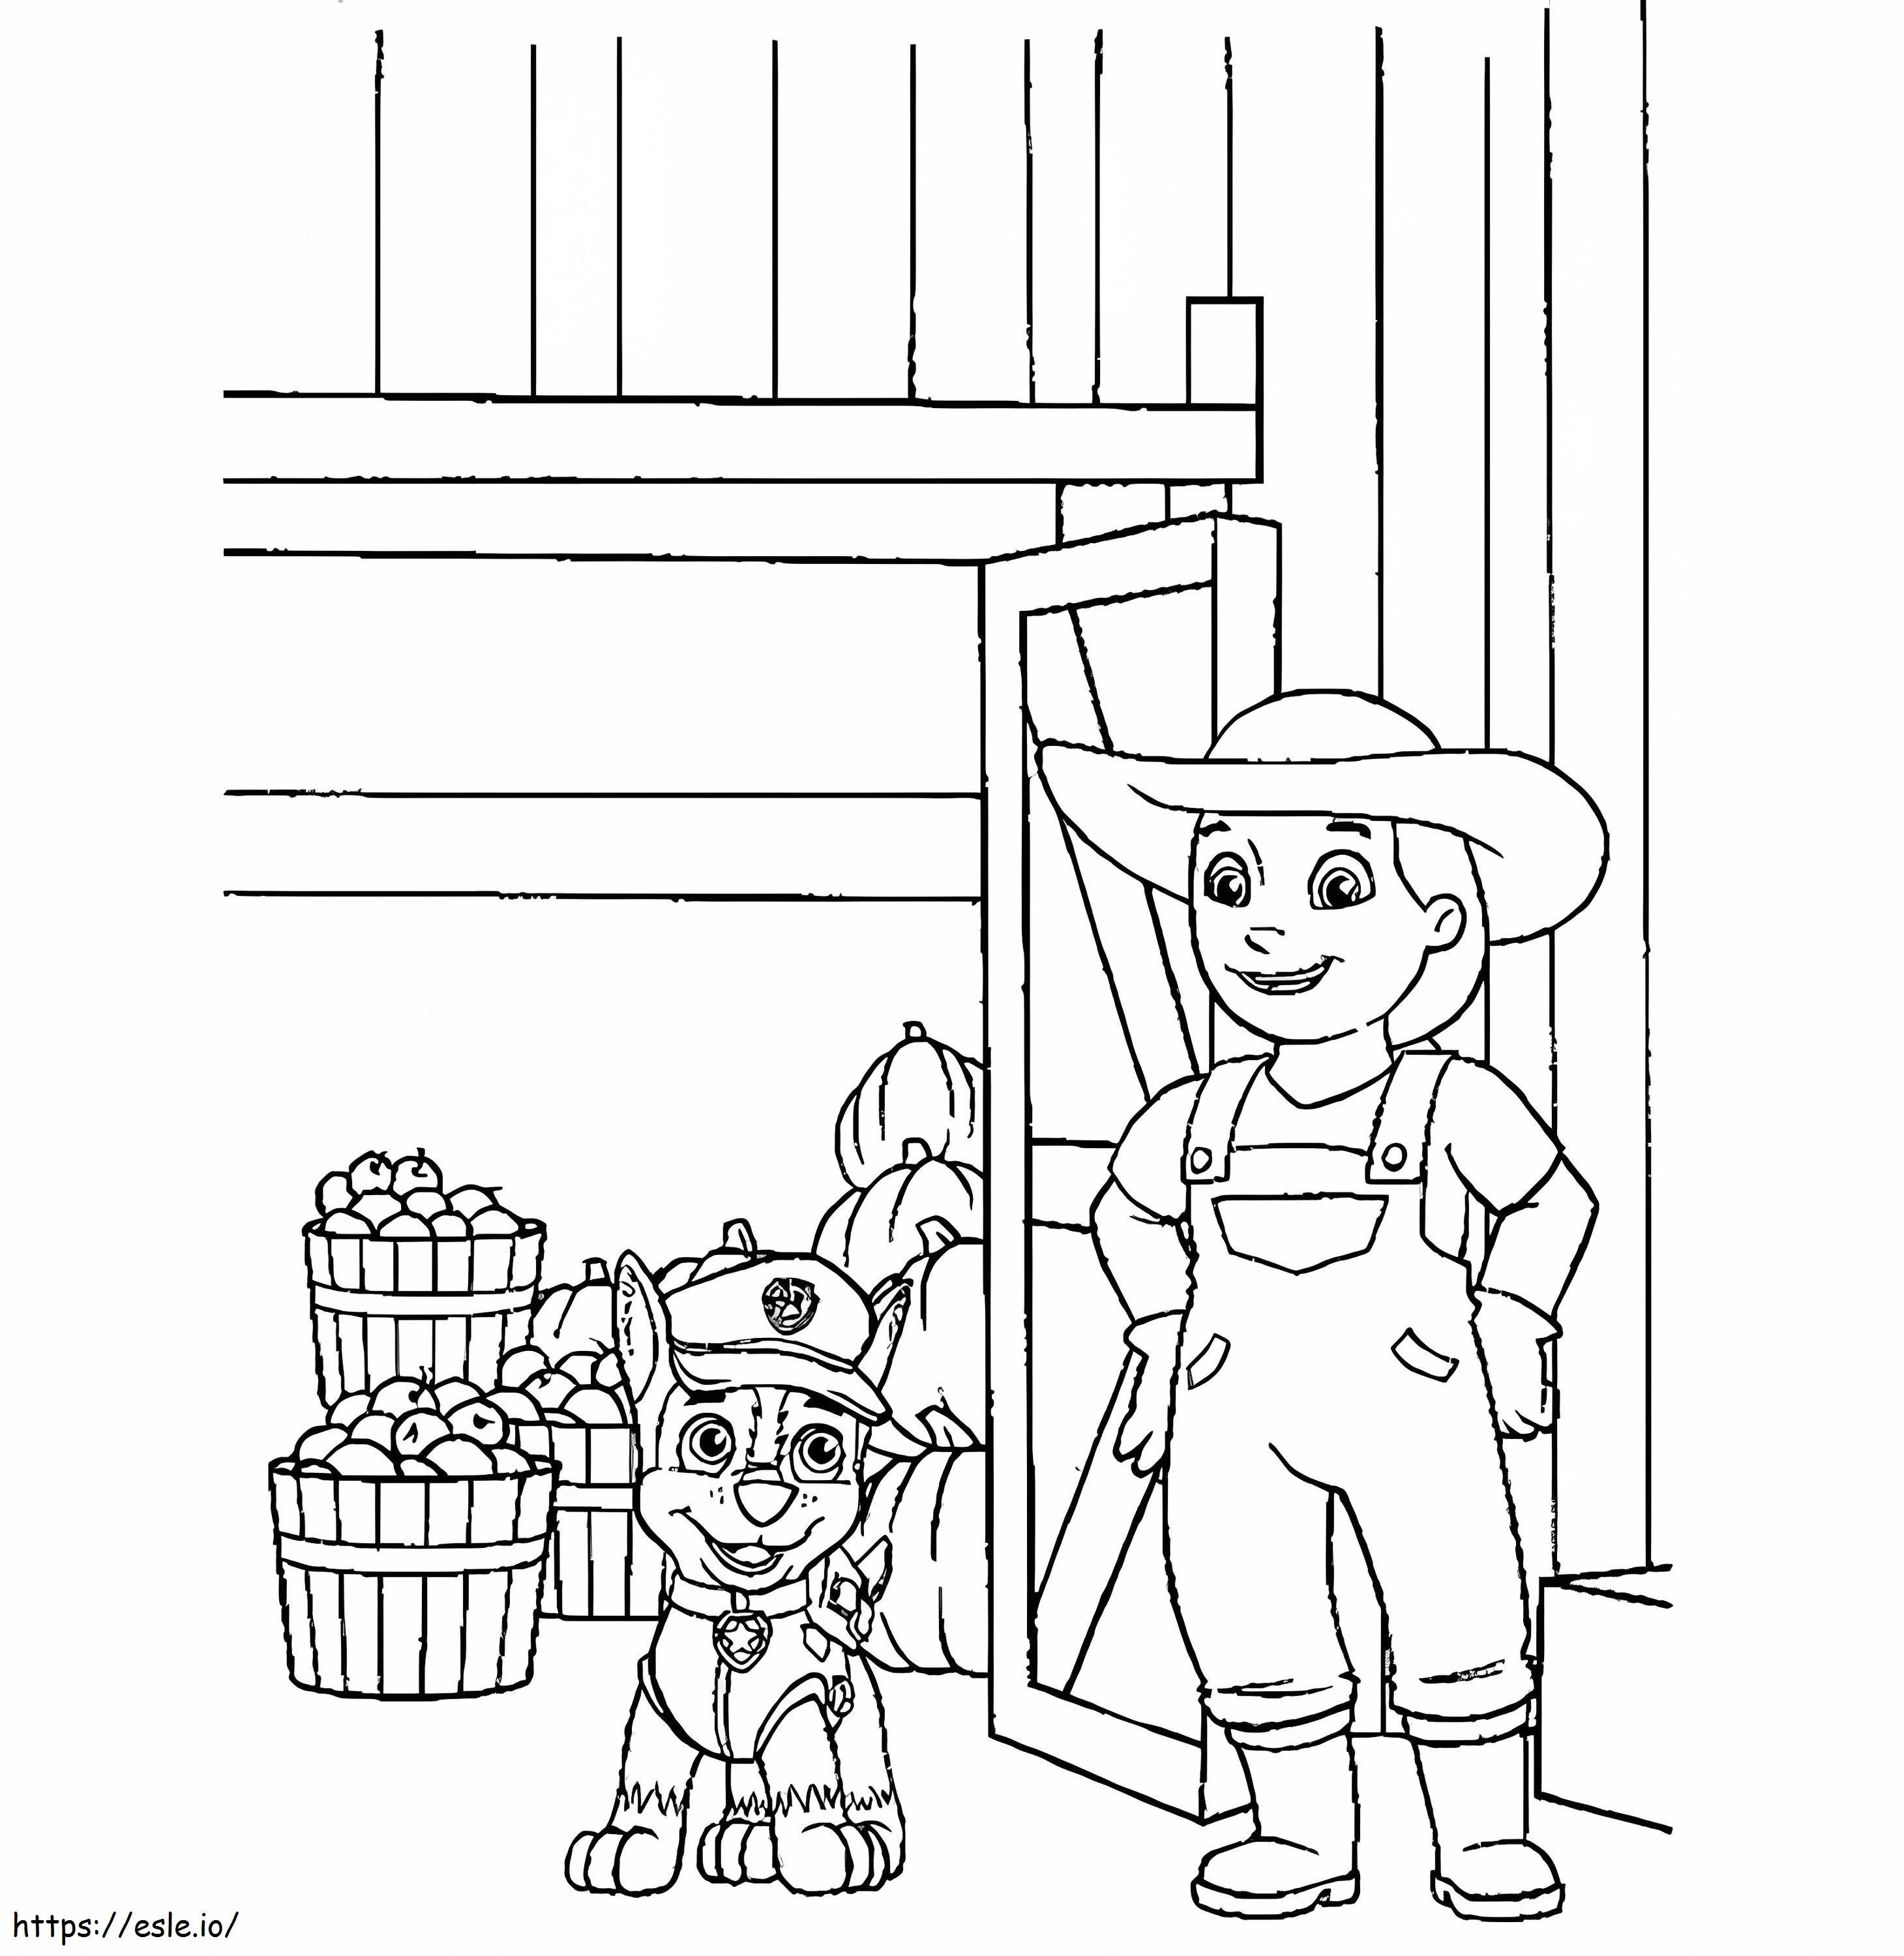 Chase Paw Patrol 32 coloring page